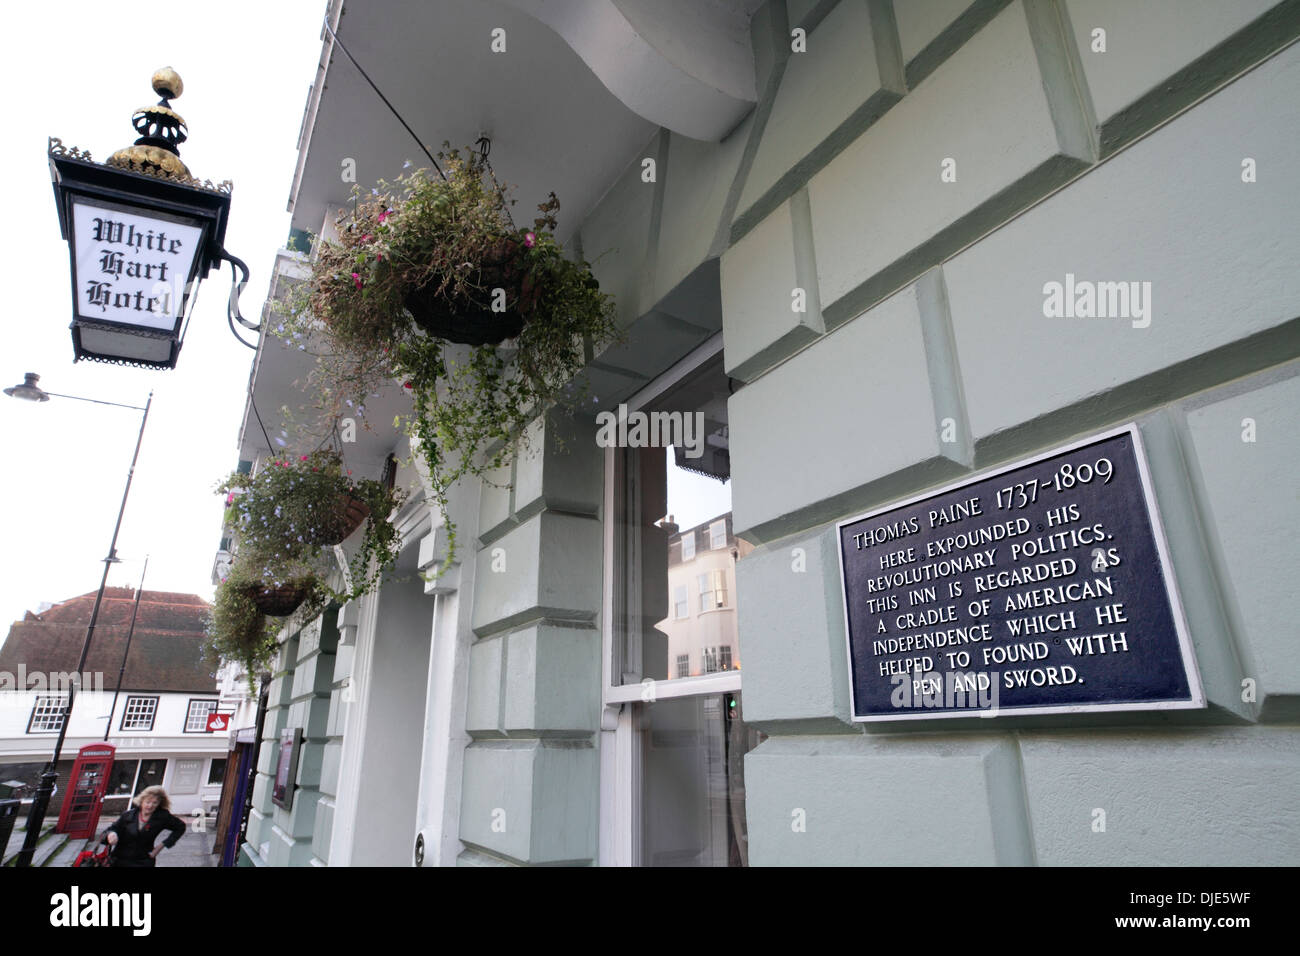 Sign commemorating Tom Paine on the outside of the White Hart Hotel, High Street, Lewes, East Sussex. Stock Photo